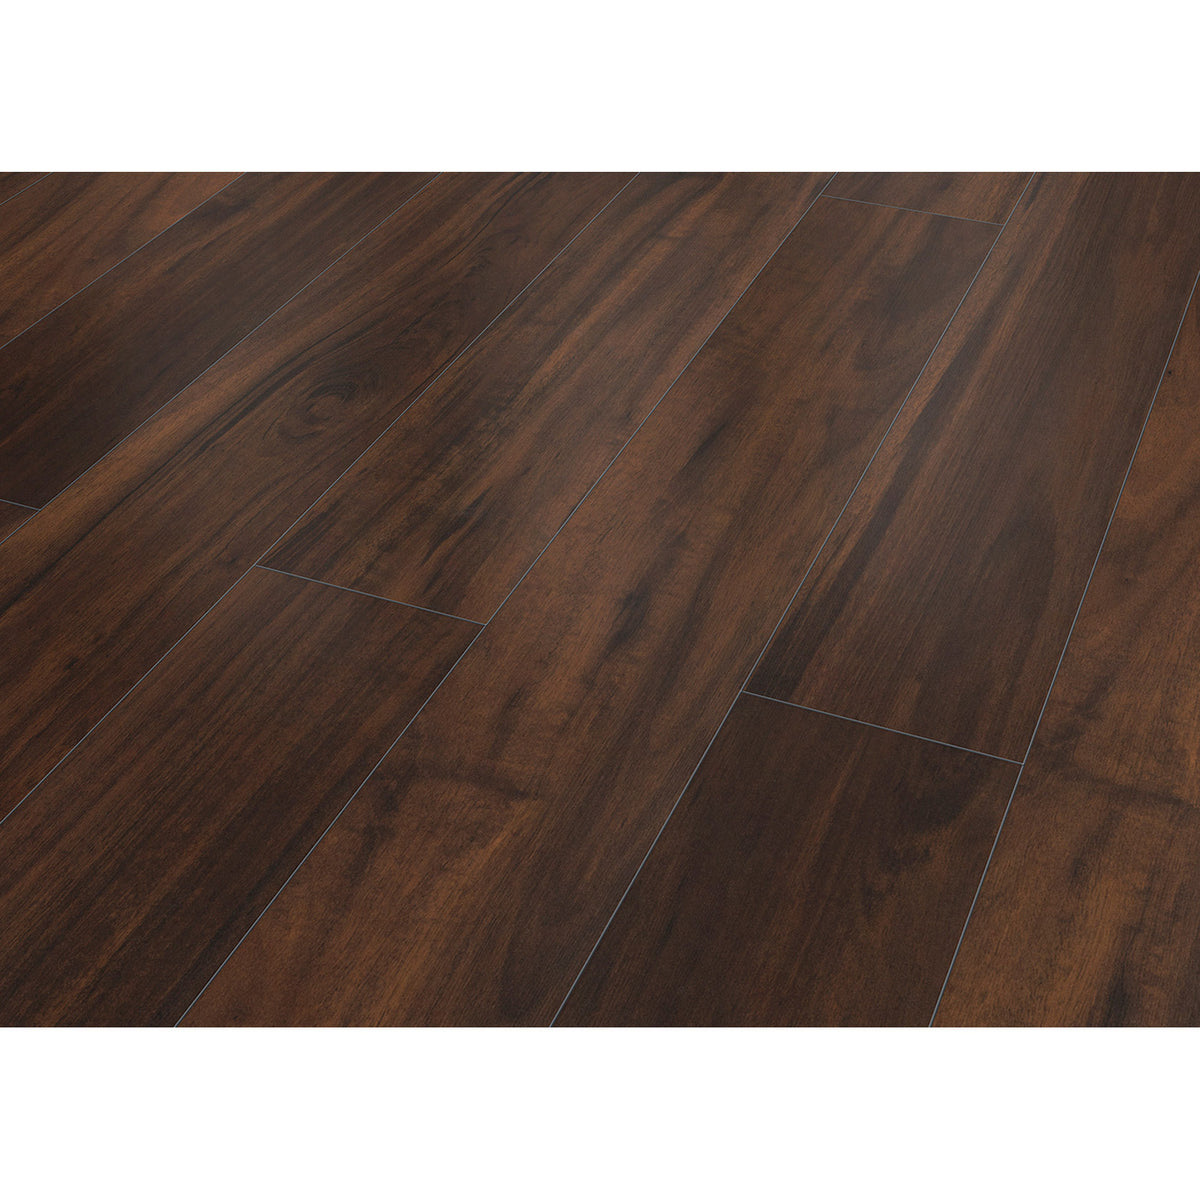 Inhaus - Solido Visions Collection - Brazilian Walnut Close View